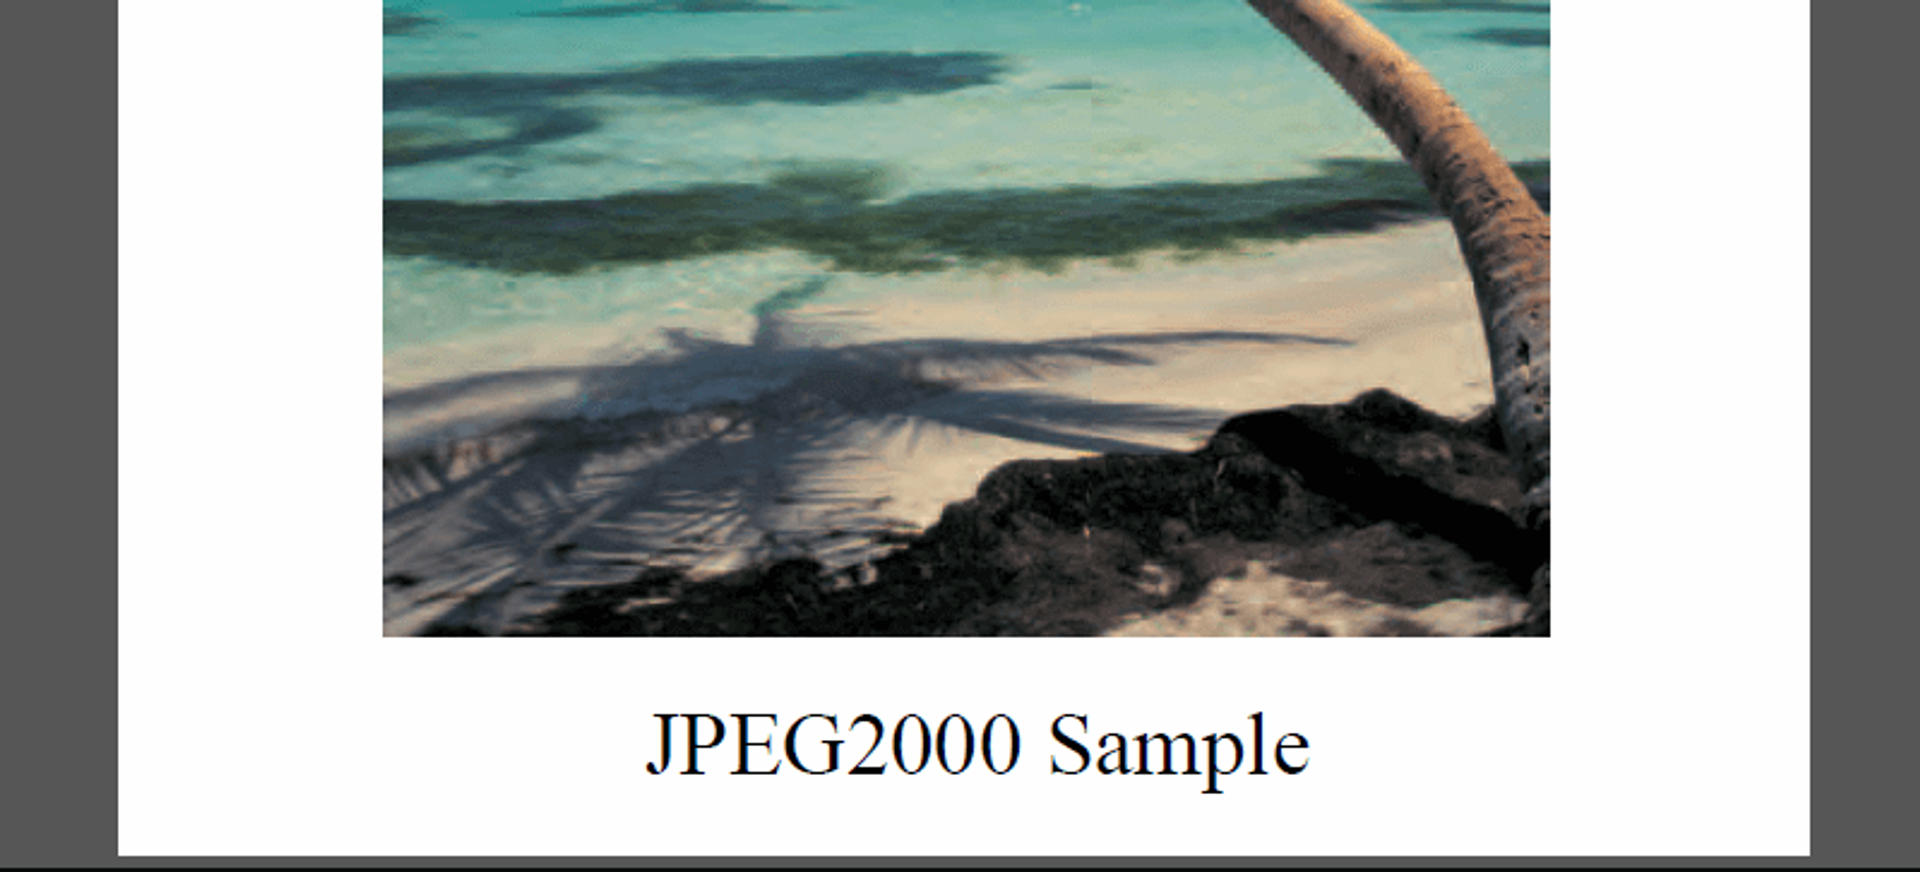 Add other image formats (for example, JPEG2000) and add text to the document